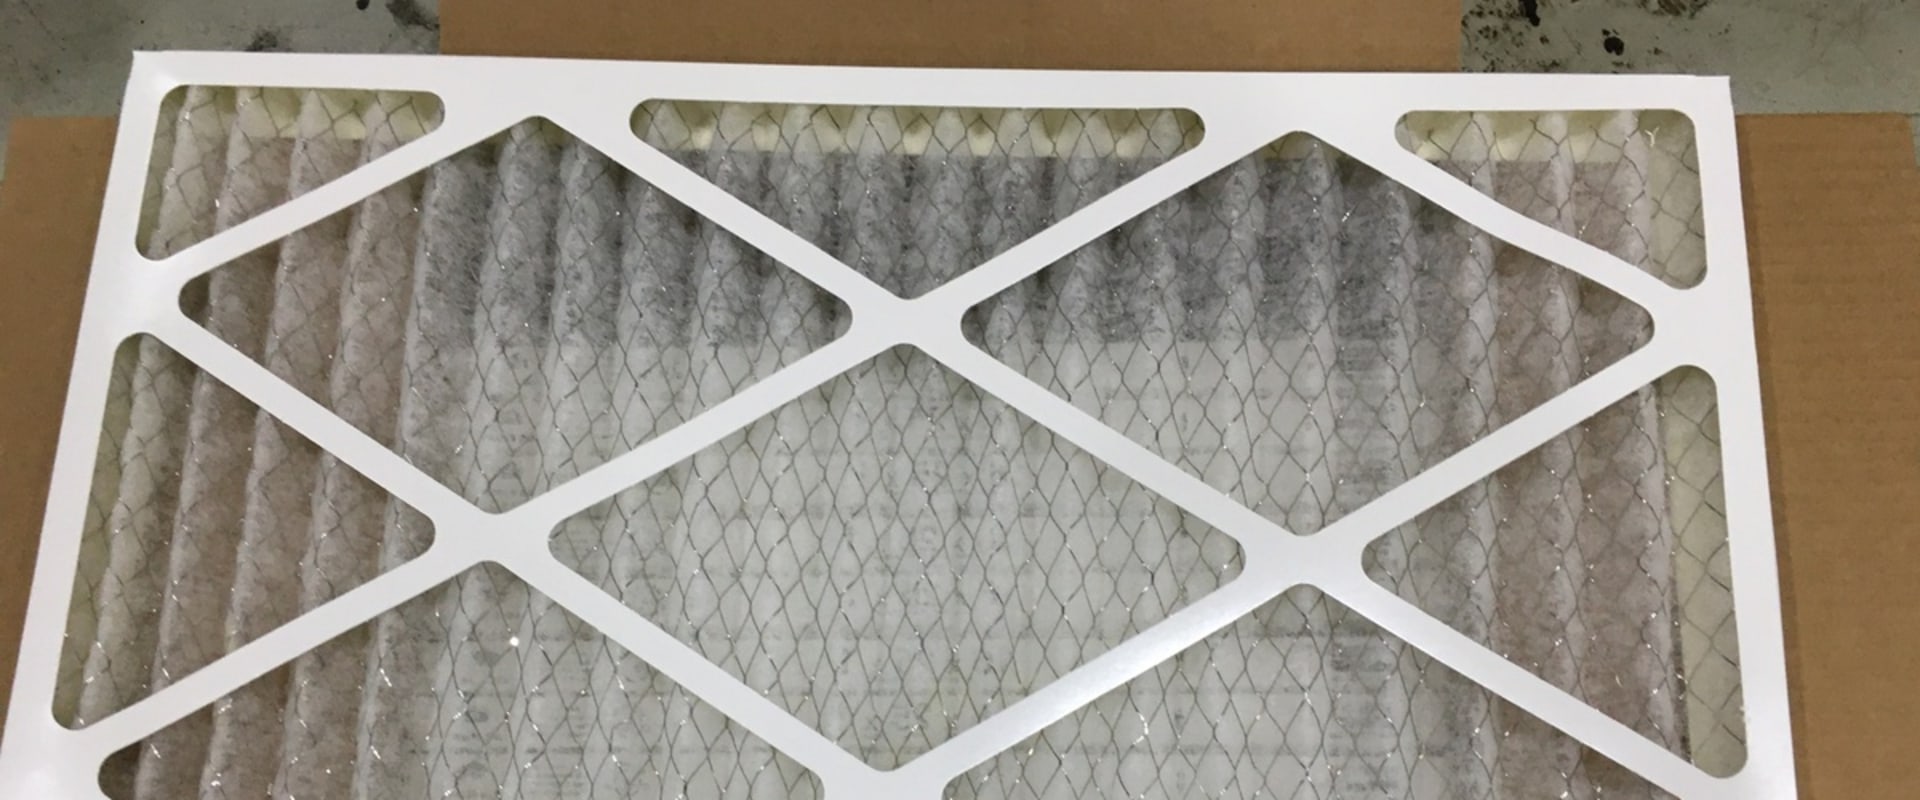 What Type of Material is Used in an Air Filter 16x25x1?